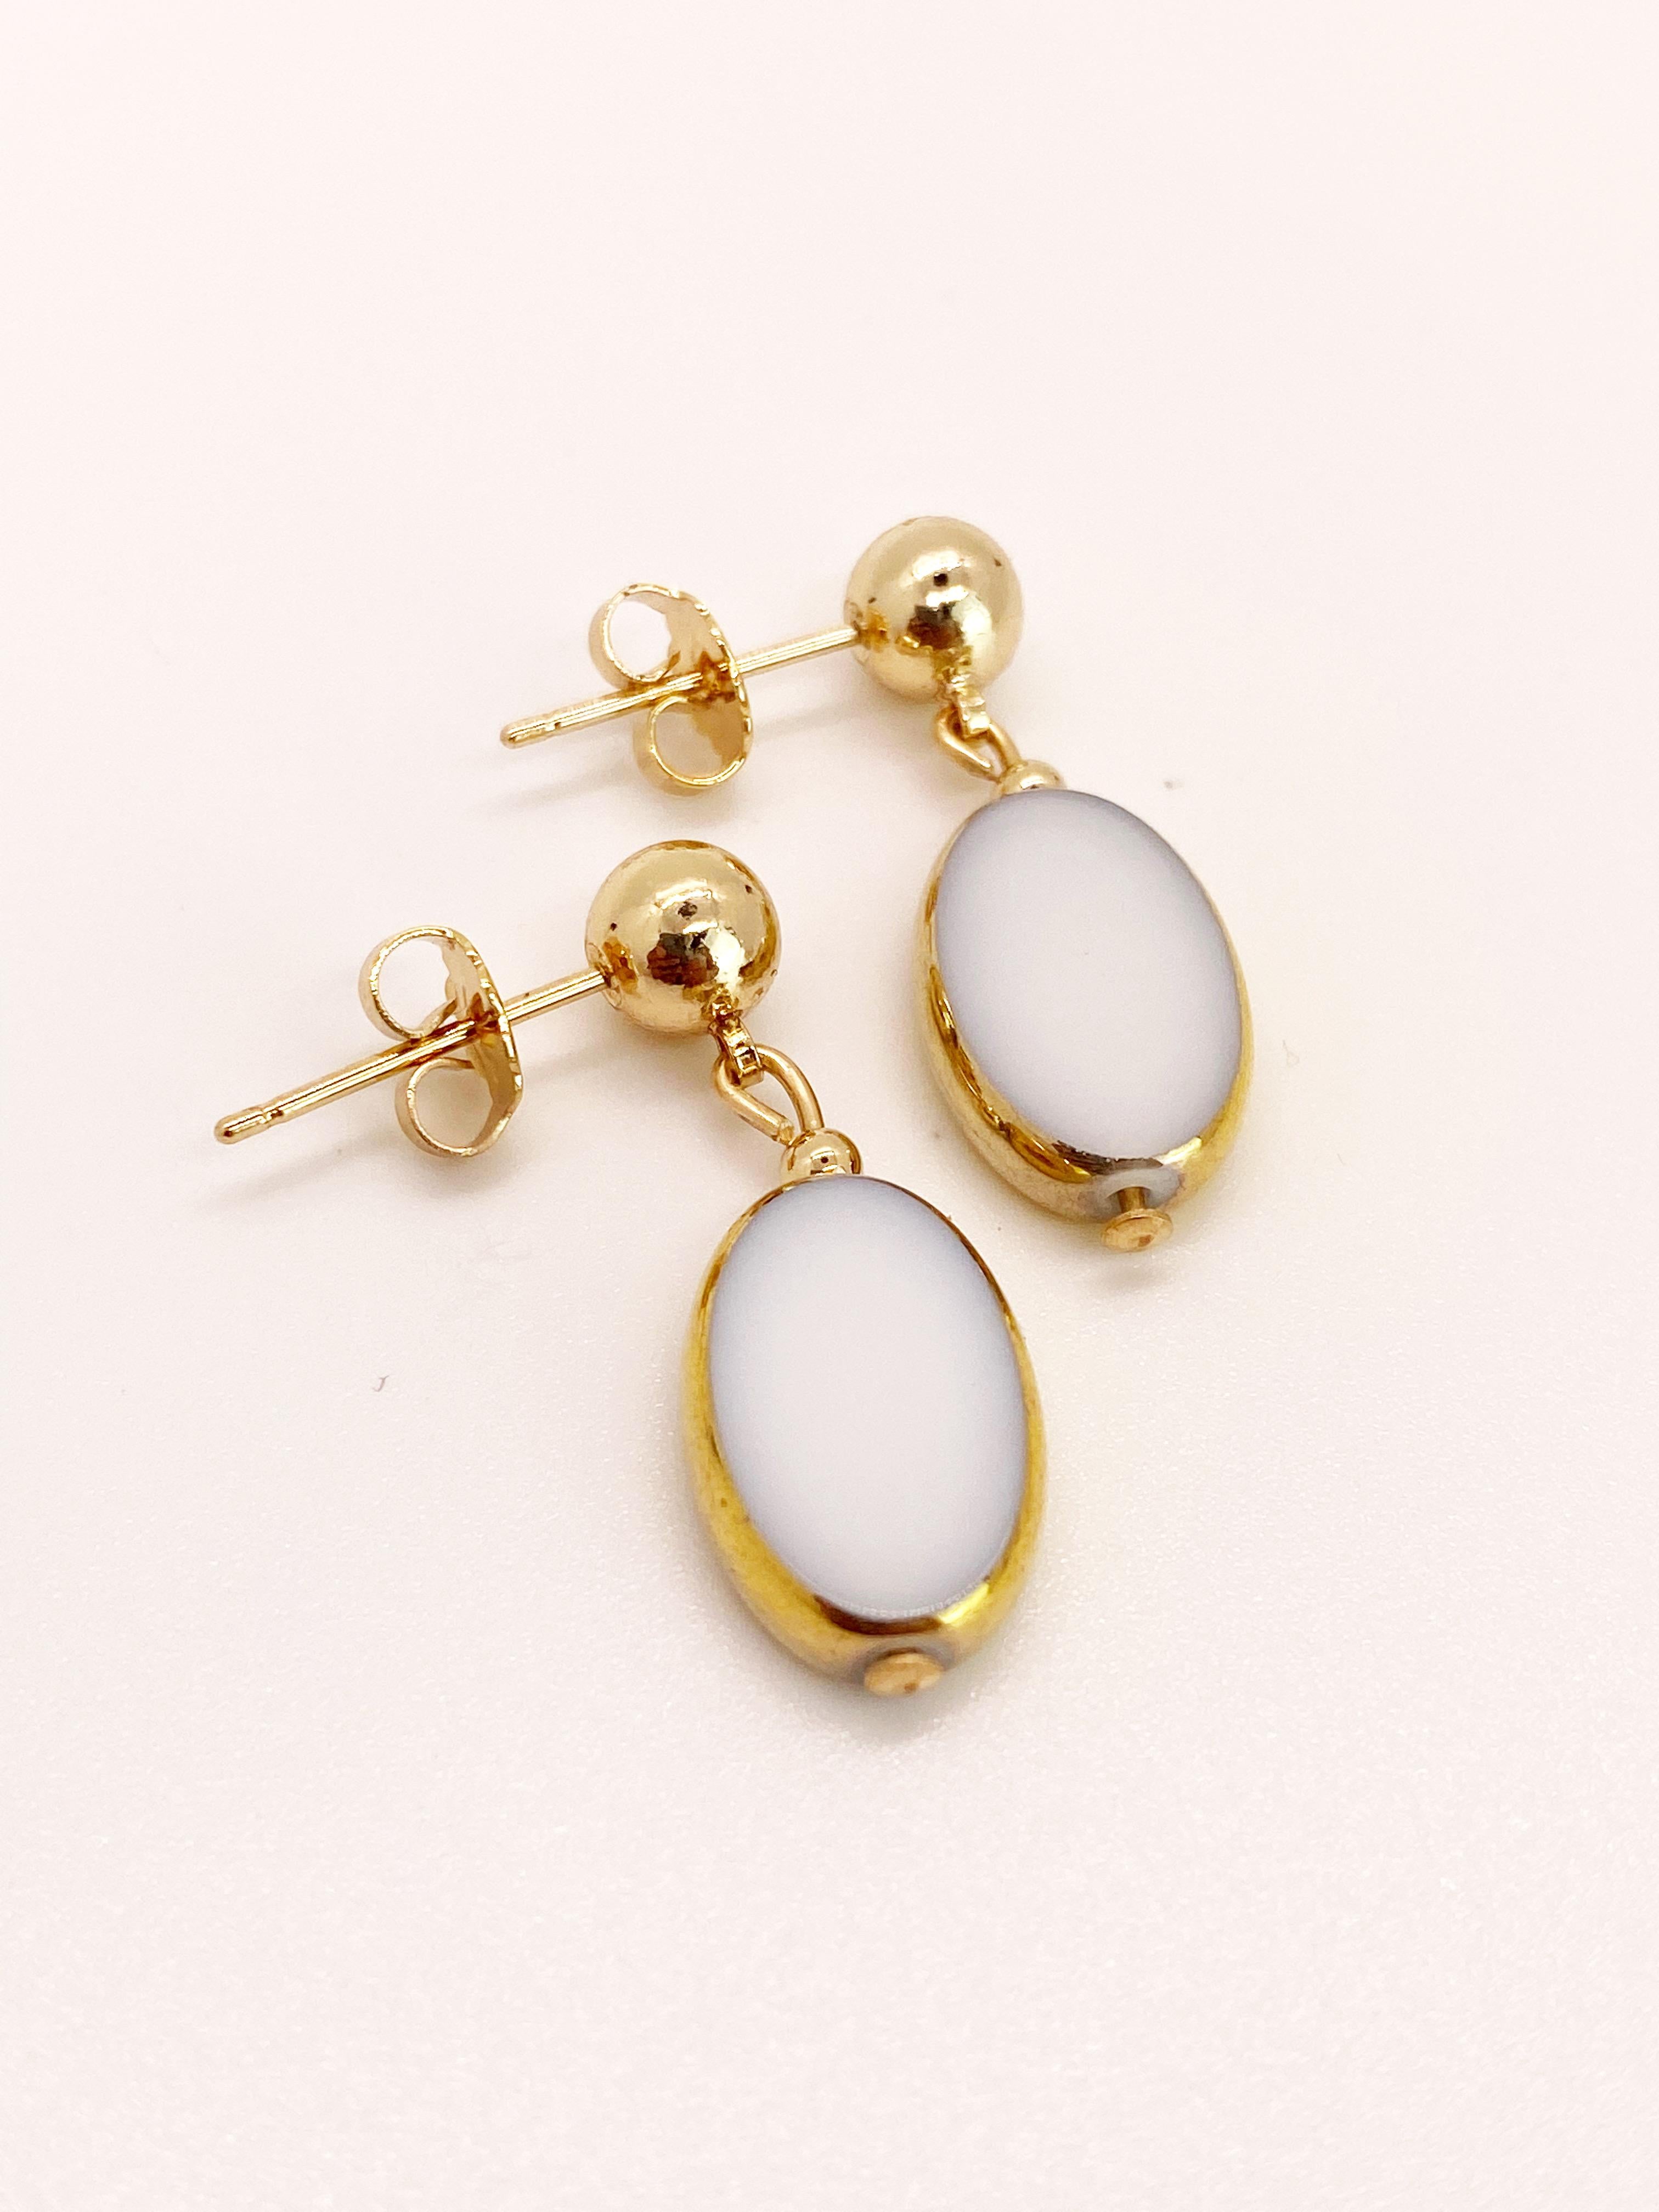 White Oval German vintage glass beads edged with 24K gold dangles on a 6mm ball 14K gold filled earring post. 

The German vintage glass beads are considered rare and collectible, circa 1920s-1960s.

*Our jewelry have maximum protection for